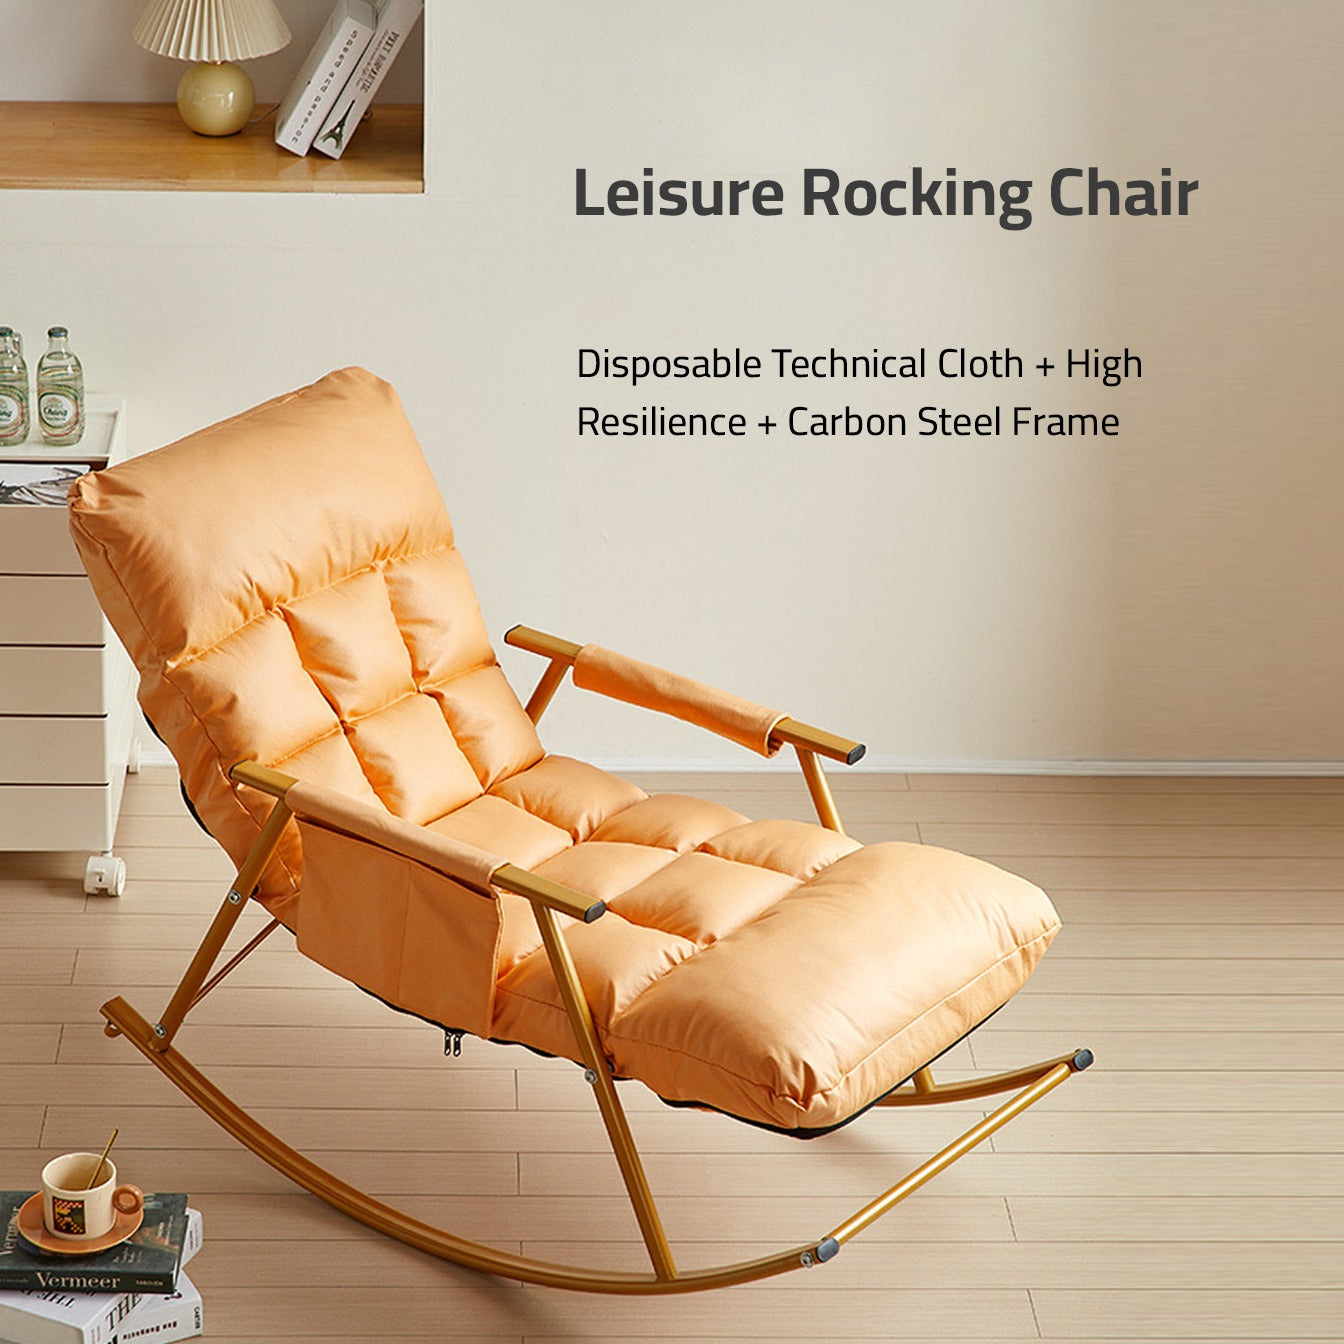 A leisure rocking chair featuring the words 'Leisure Rocking Chair' and designed with a leg rest.